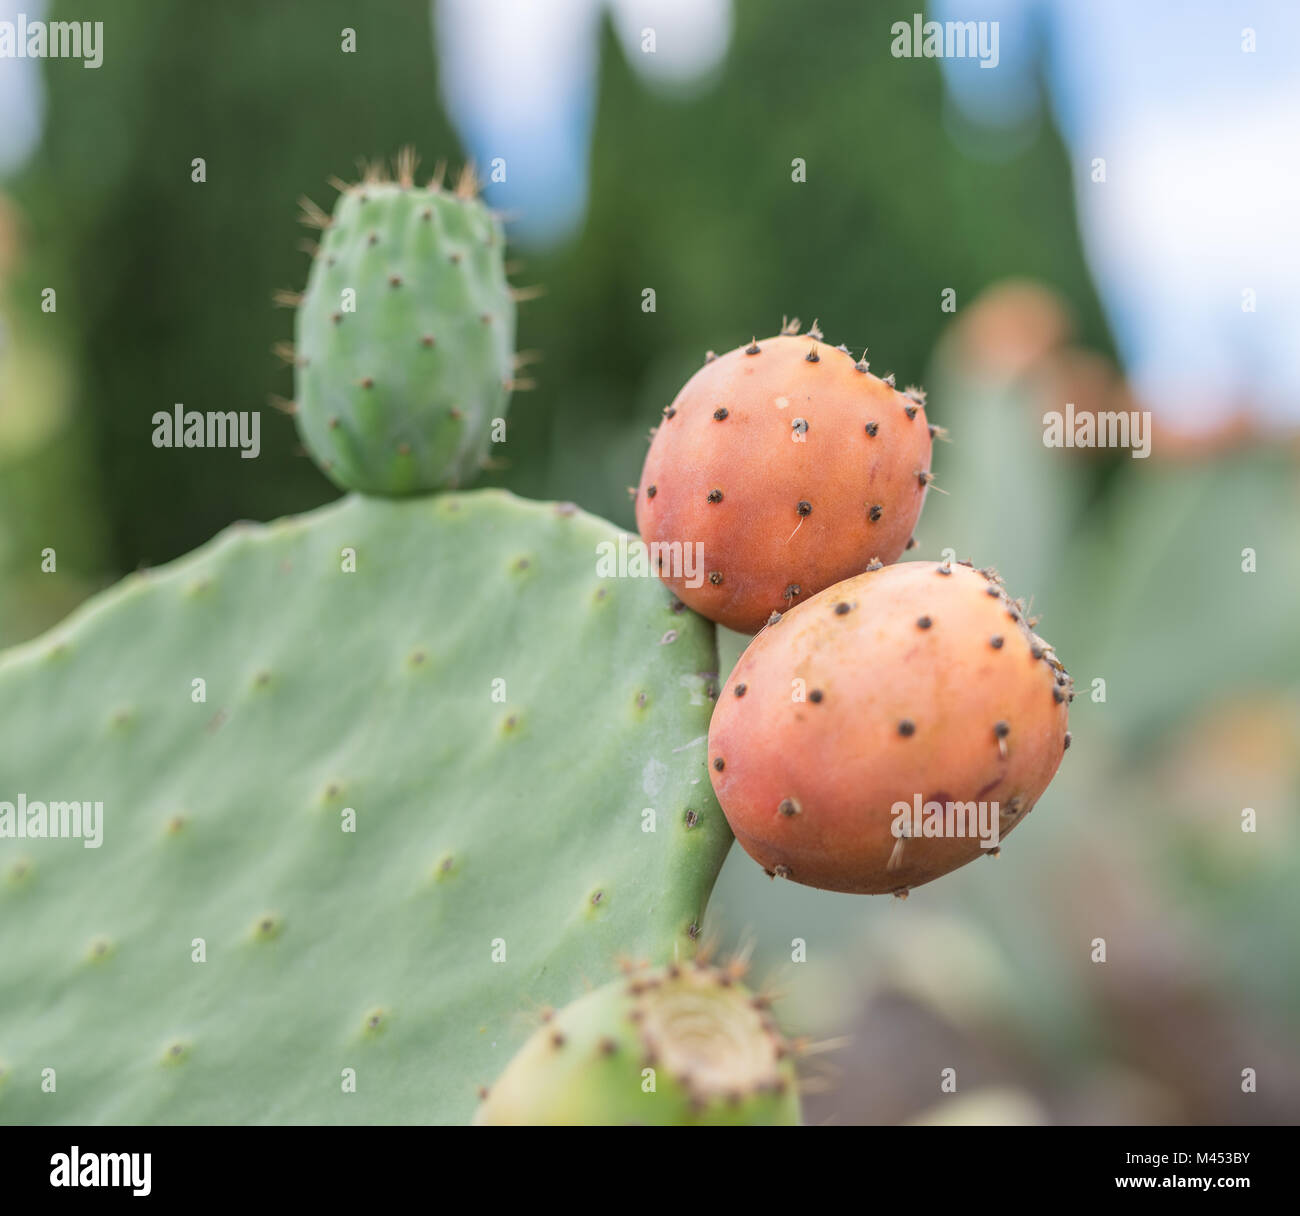 Prickly pear or opuntia plant close -up. Stock Photo